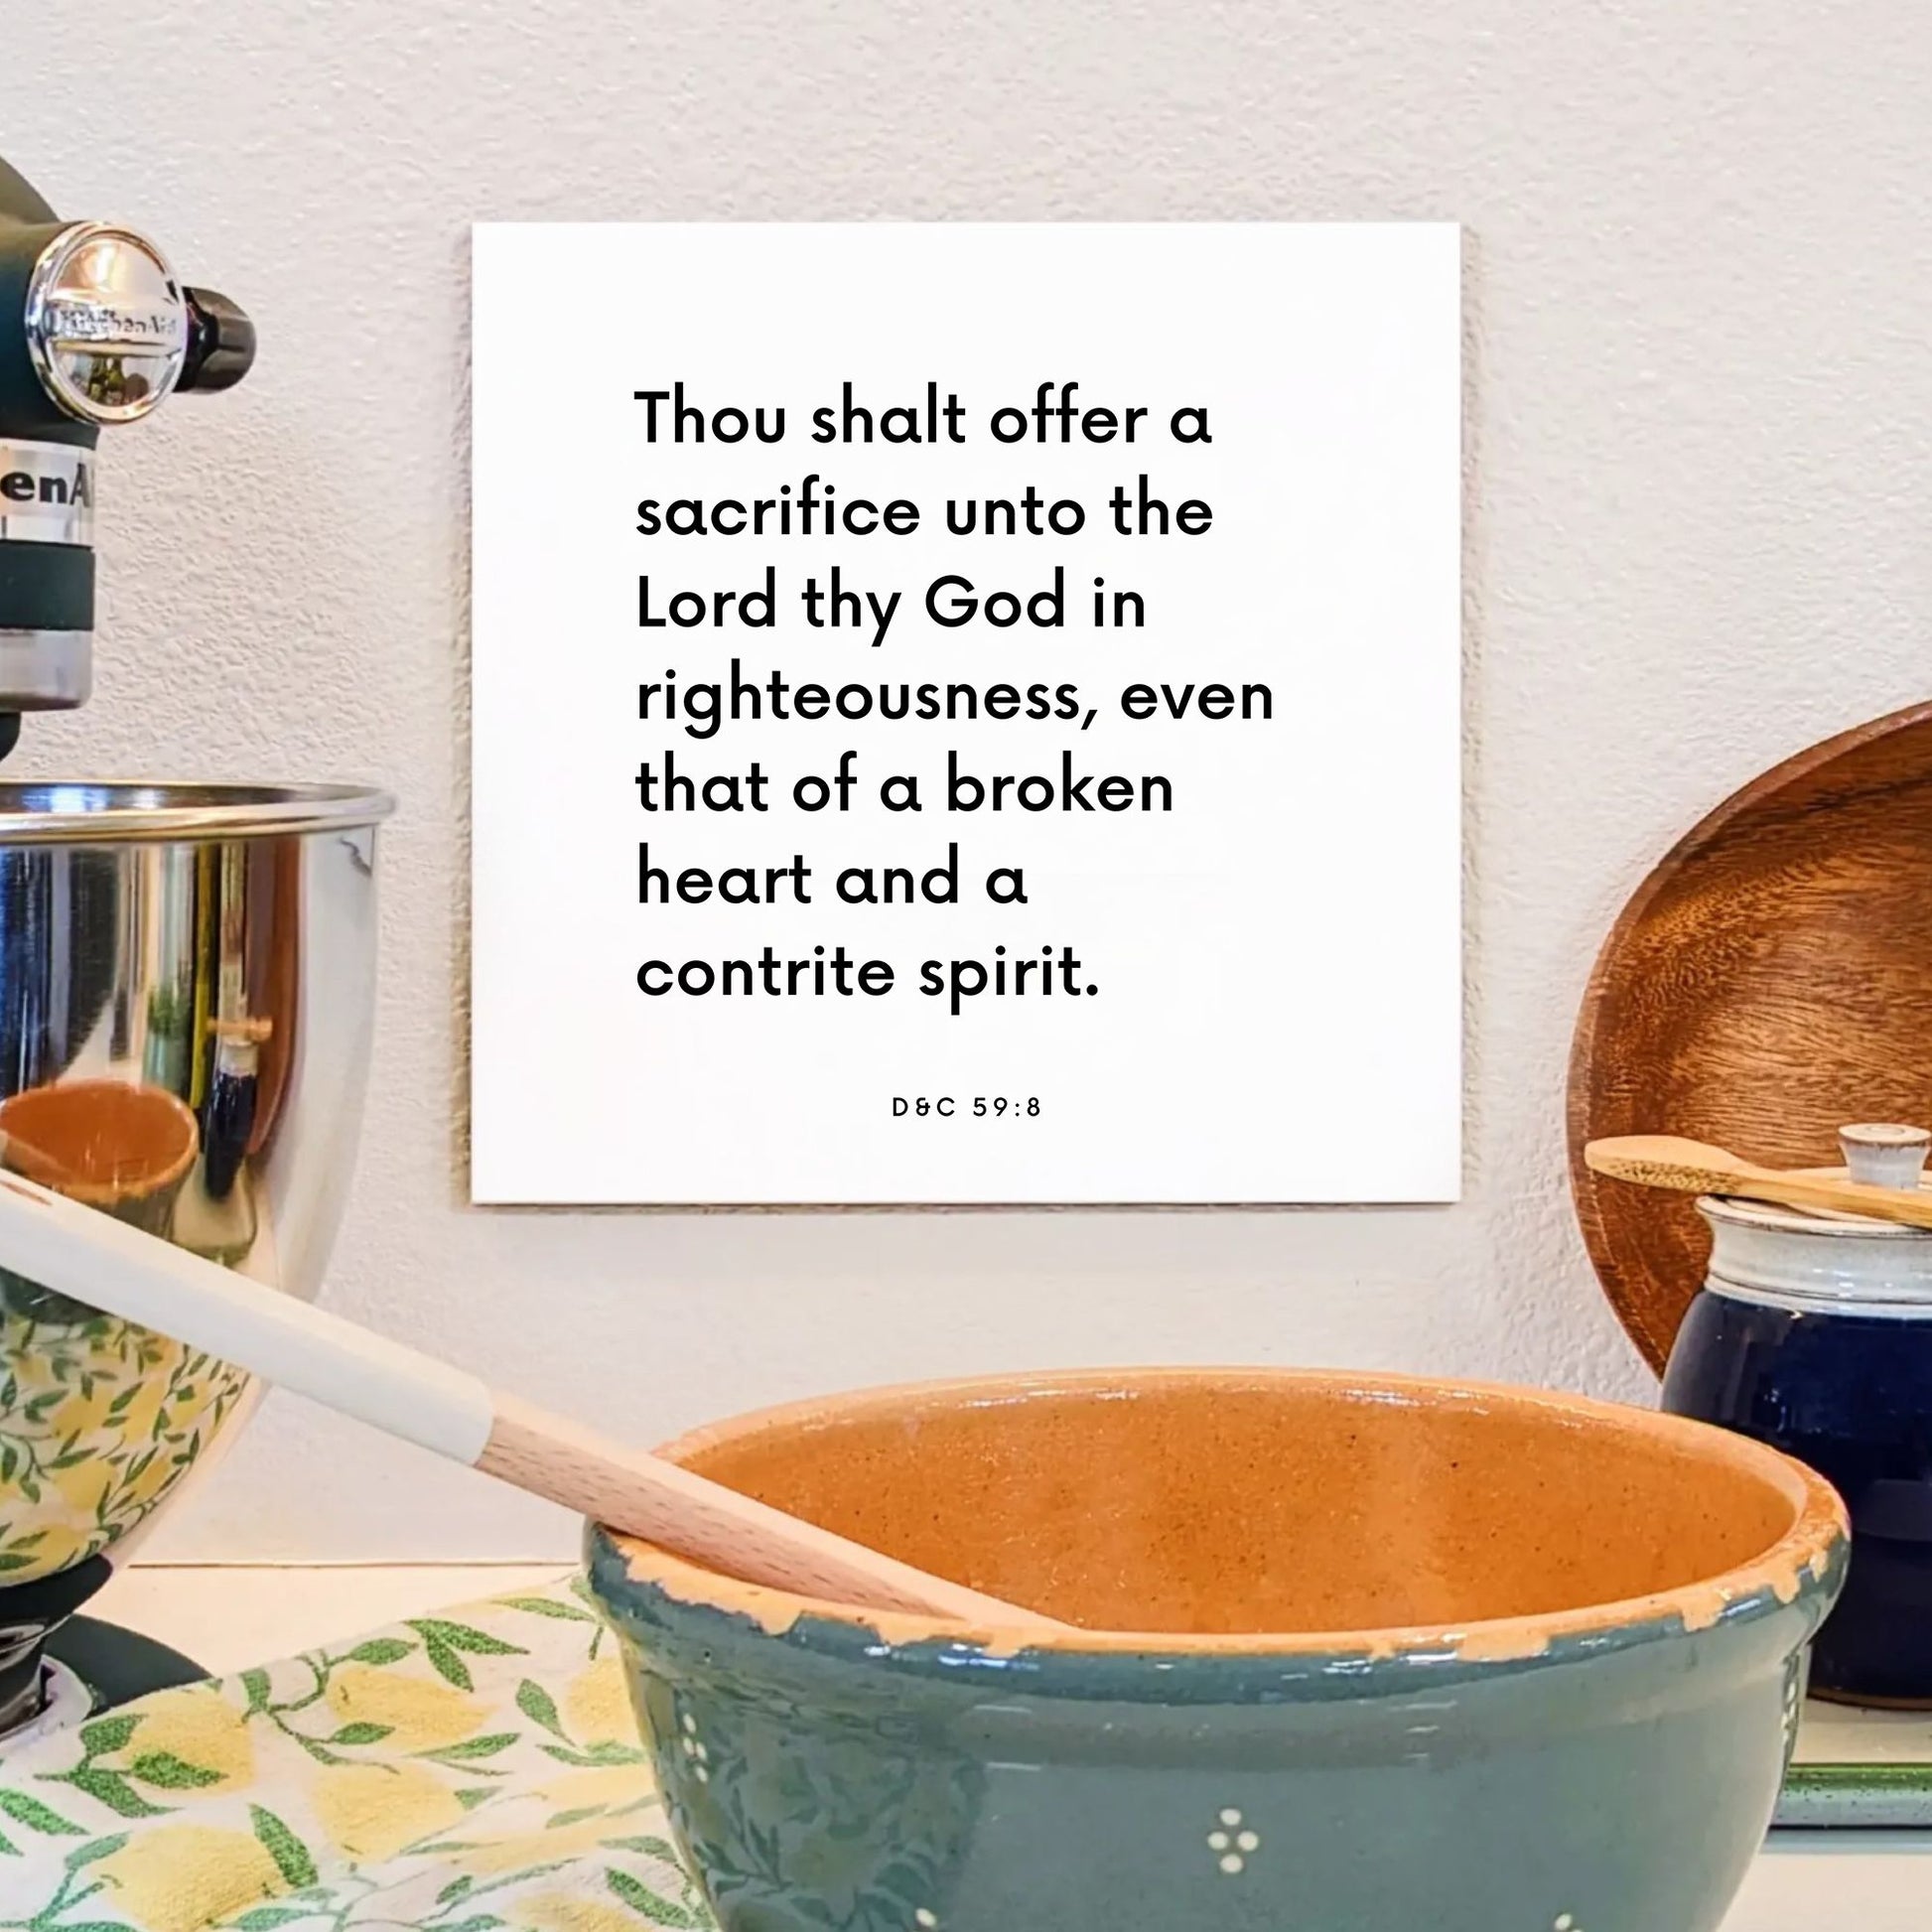 Kitchen mouting of the scripture tile for D&C 59:8 - "Thou shalt offer a sacrifice unto the Lord thy God"